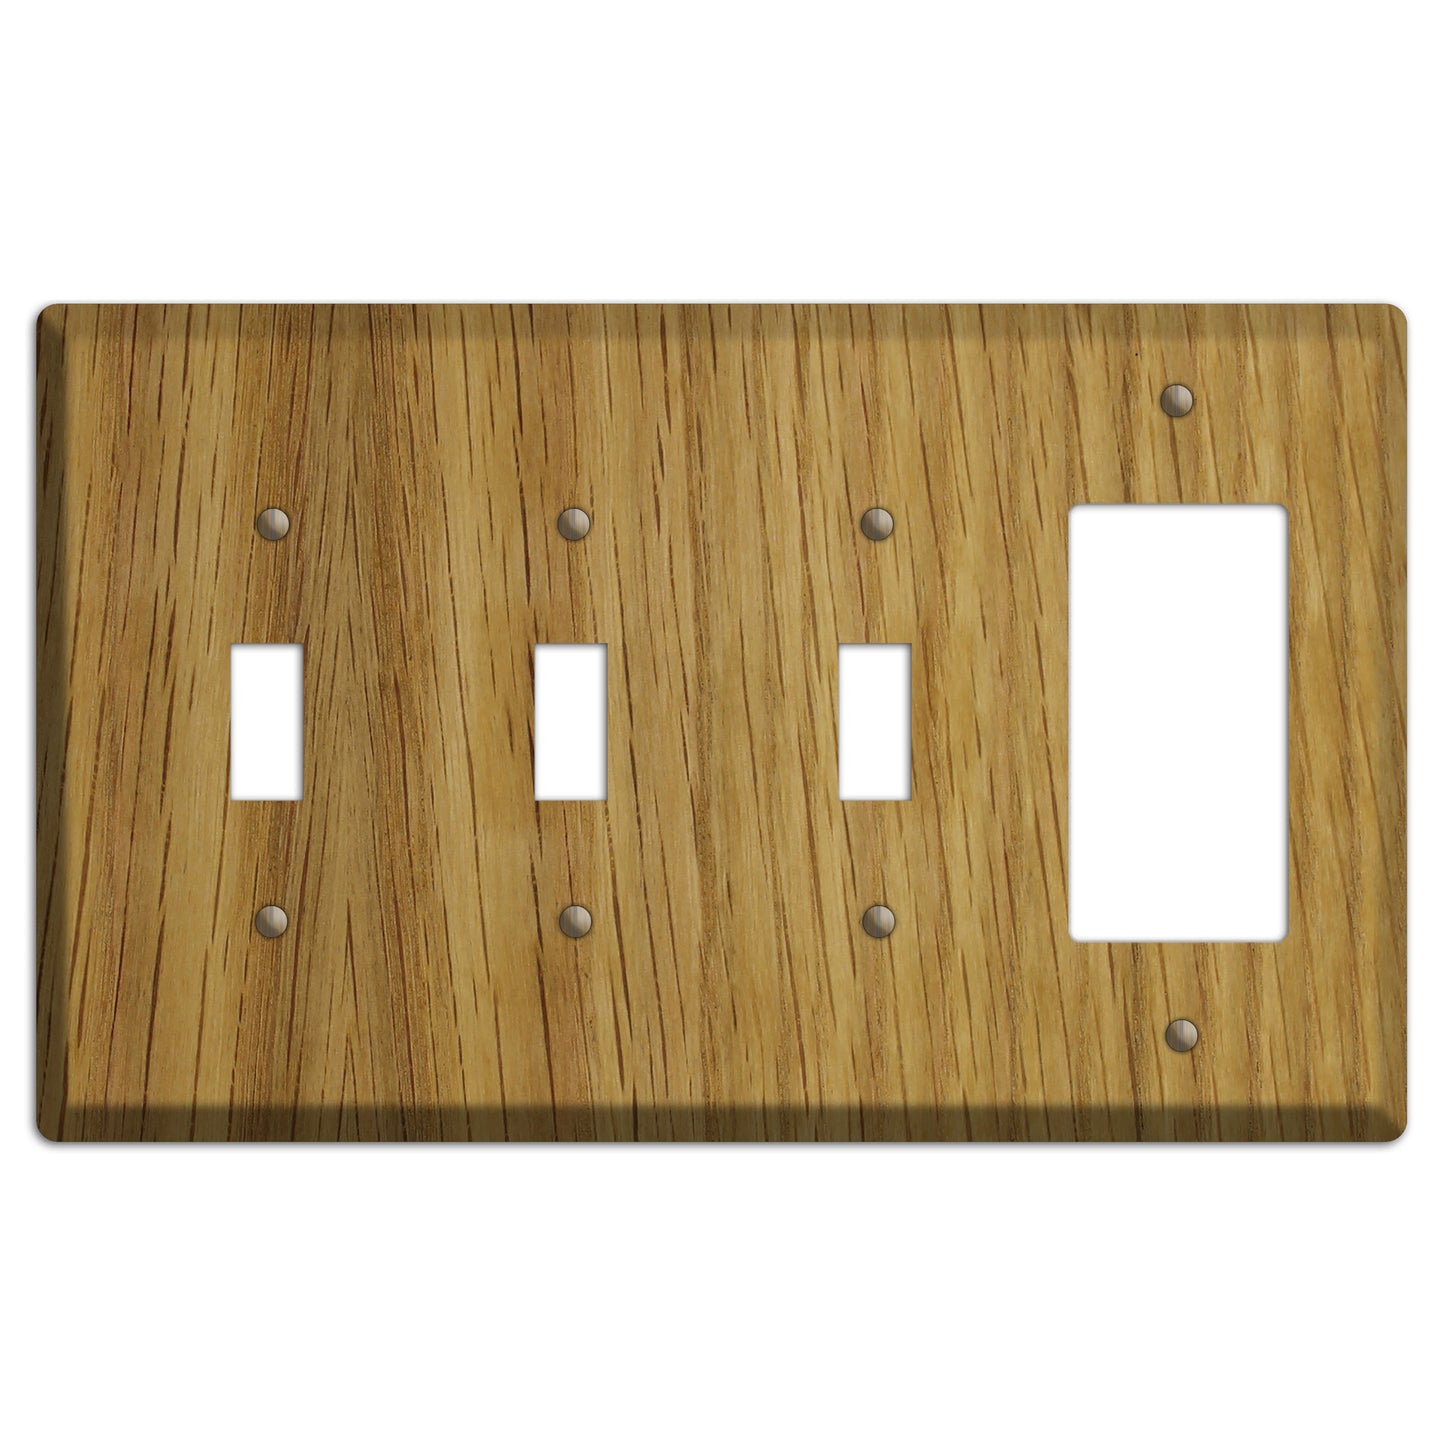 Unfinished White Oak Wood 3 Toggle / Rocker Outlet Cover Plate